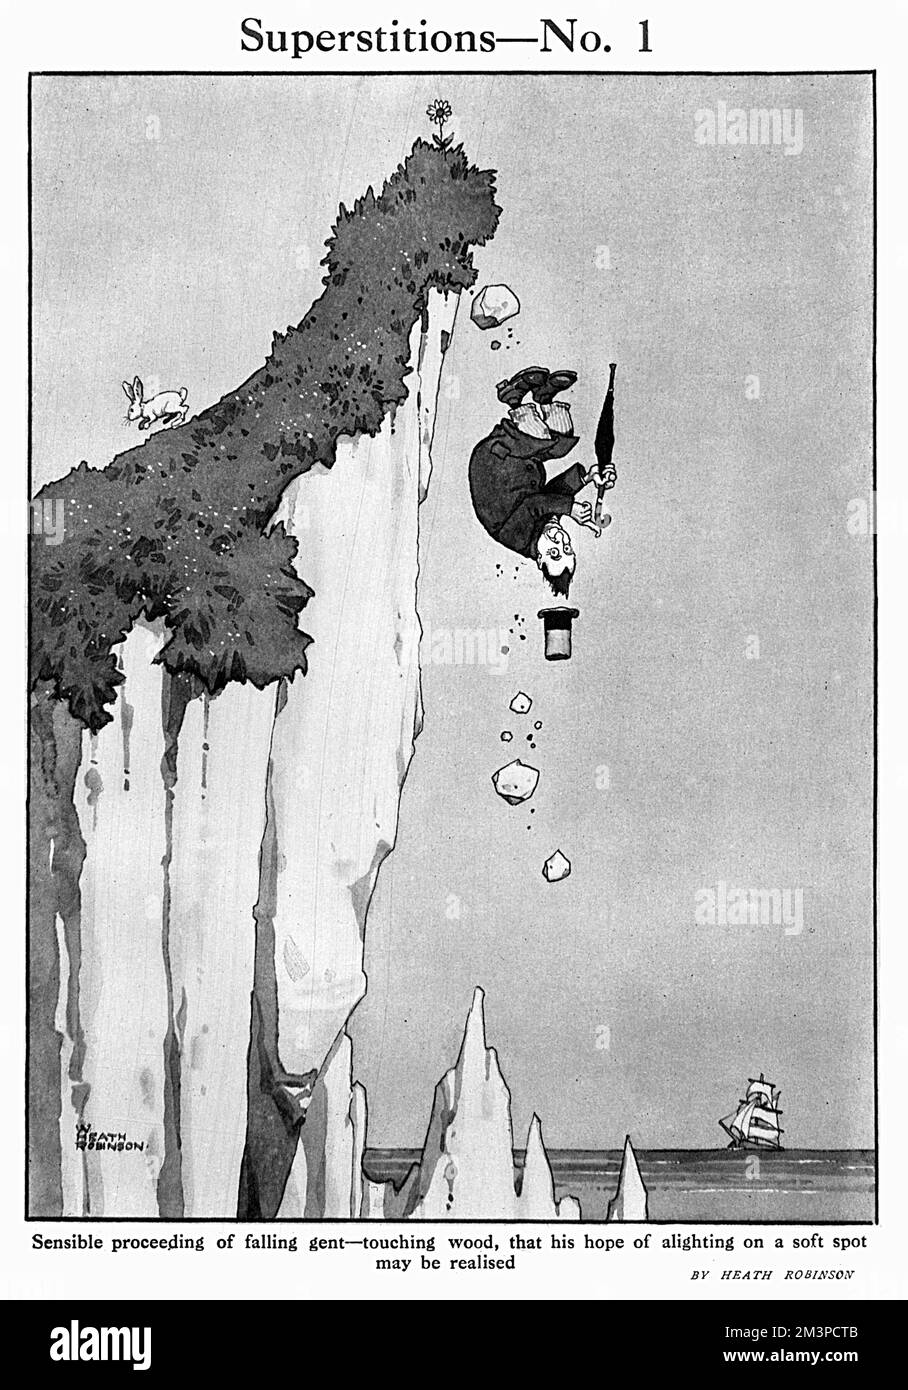 Sensible proceeding of falling gent - touching wood, that his hope of alighting on a soft spot may be realised.  The ultimate optimist depicted by William Heath Robinson in a cartoon which shows a man about to fall victim of an unfortunate accident.     Date: 1919 Stock Photo